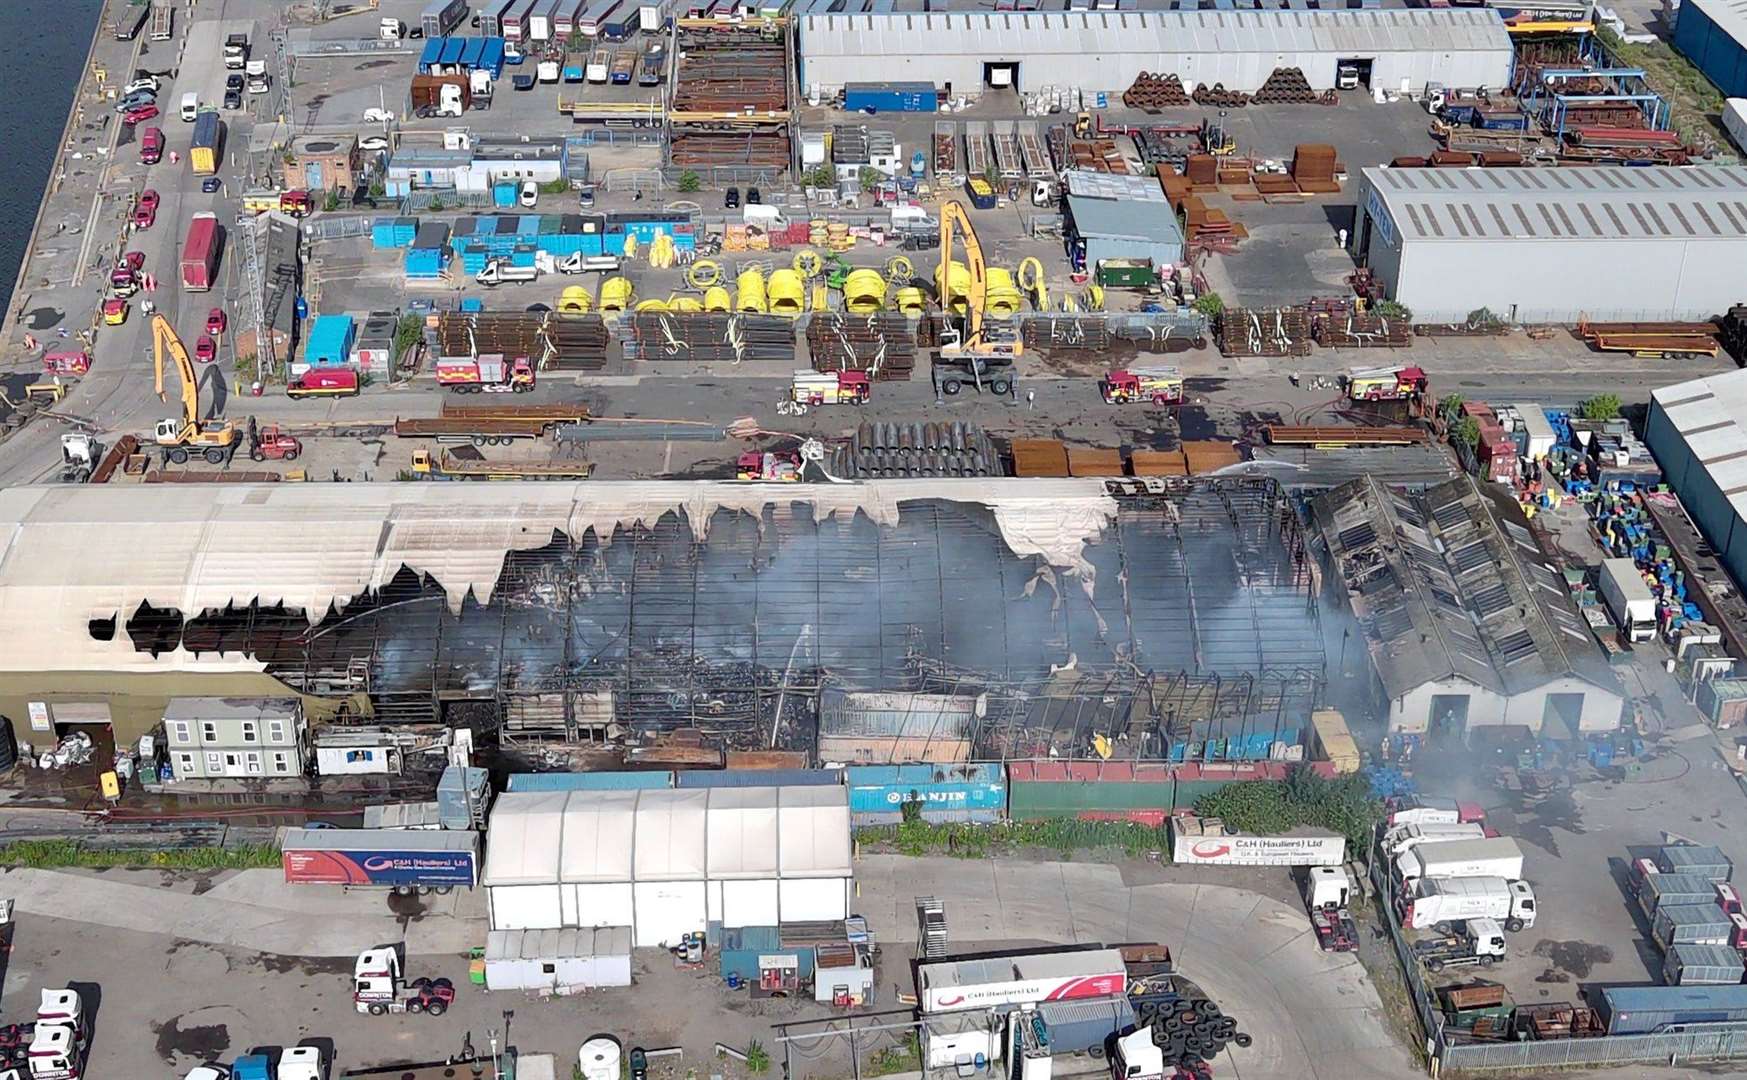 Drone images show the extent of the damage. Picture: @AerialimagingSE